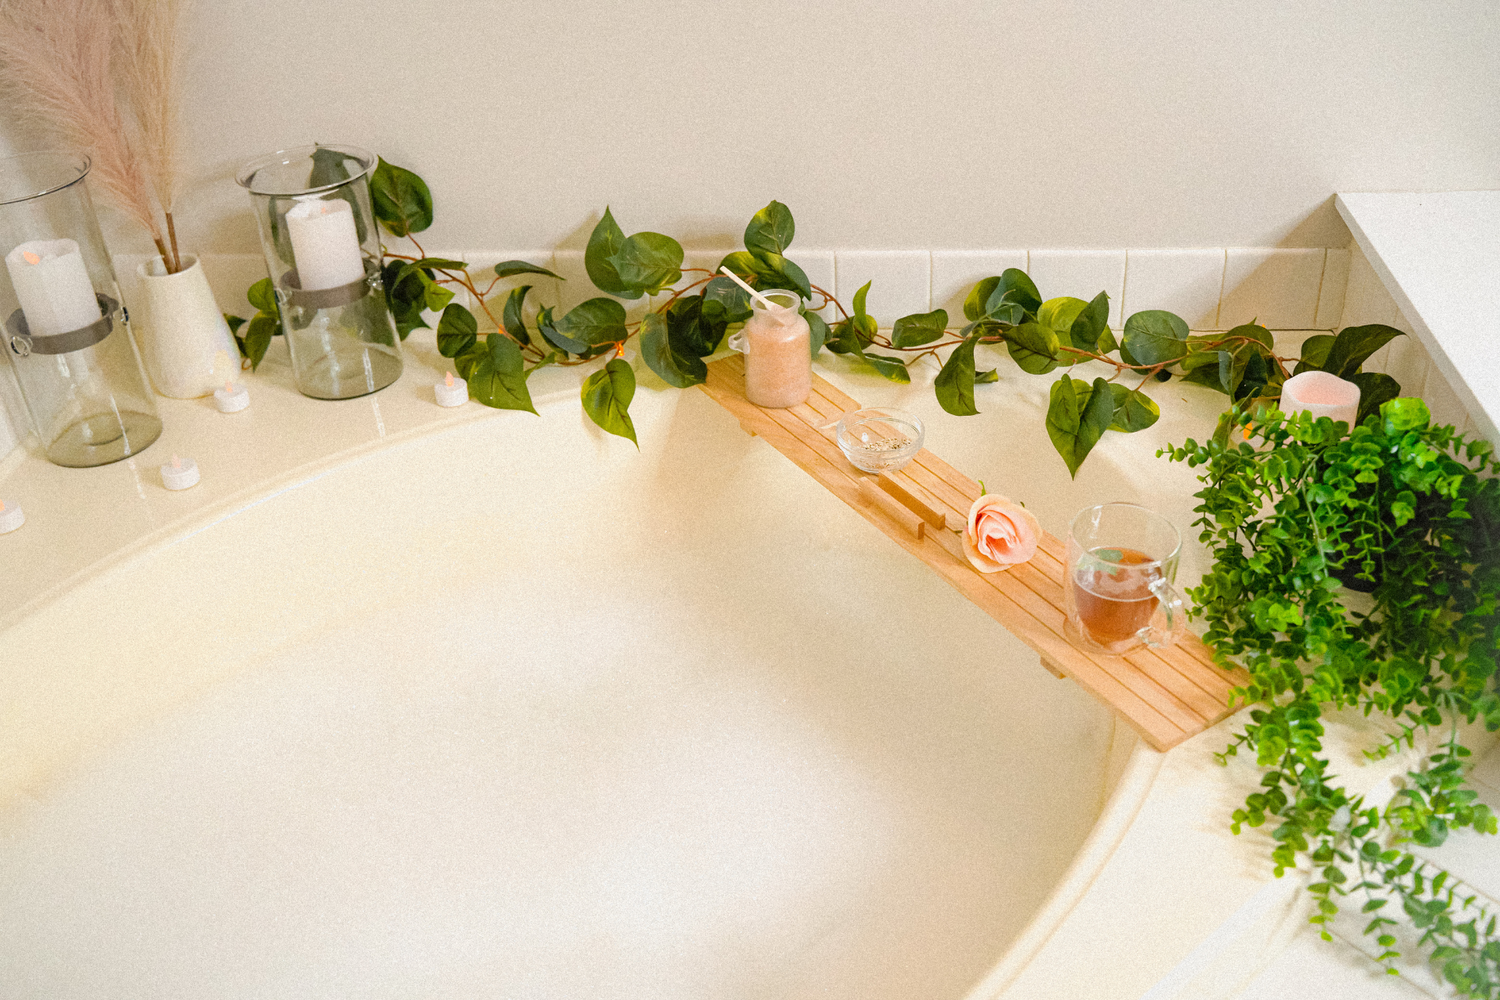 Relaxing bubble bath with candles and green vines around bath. Bath has wooden plank with tea, rose, and bath soak container